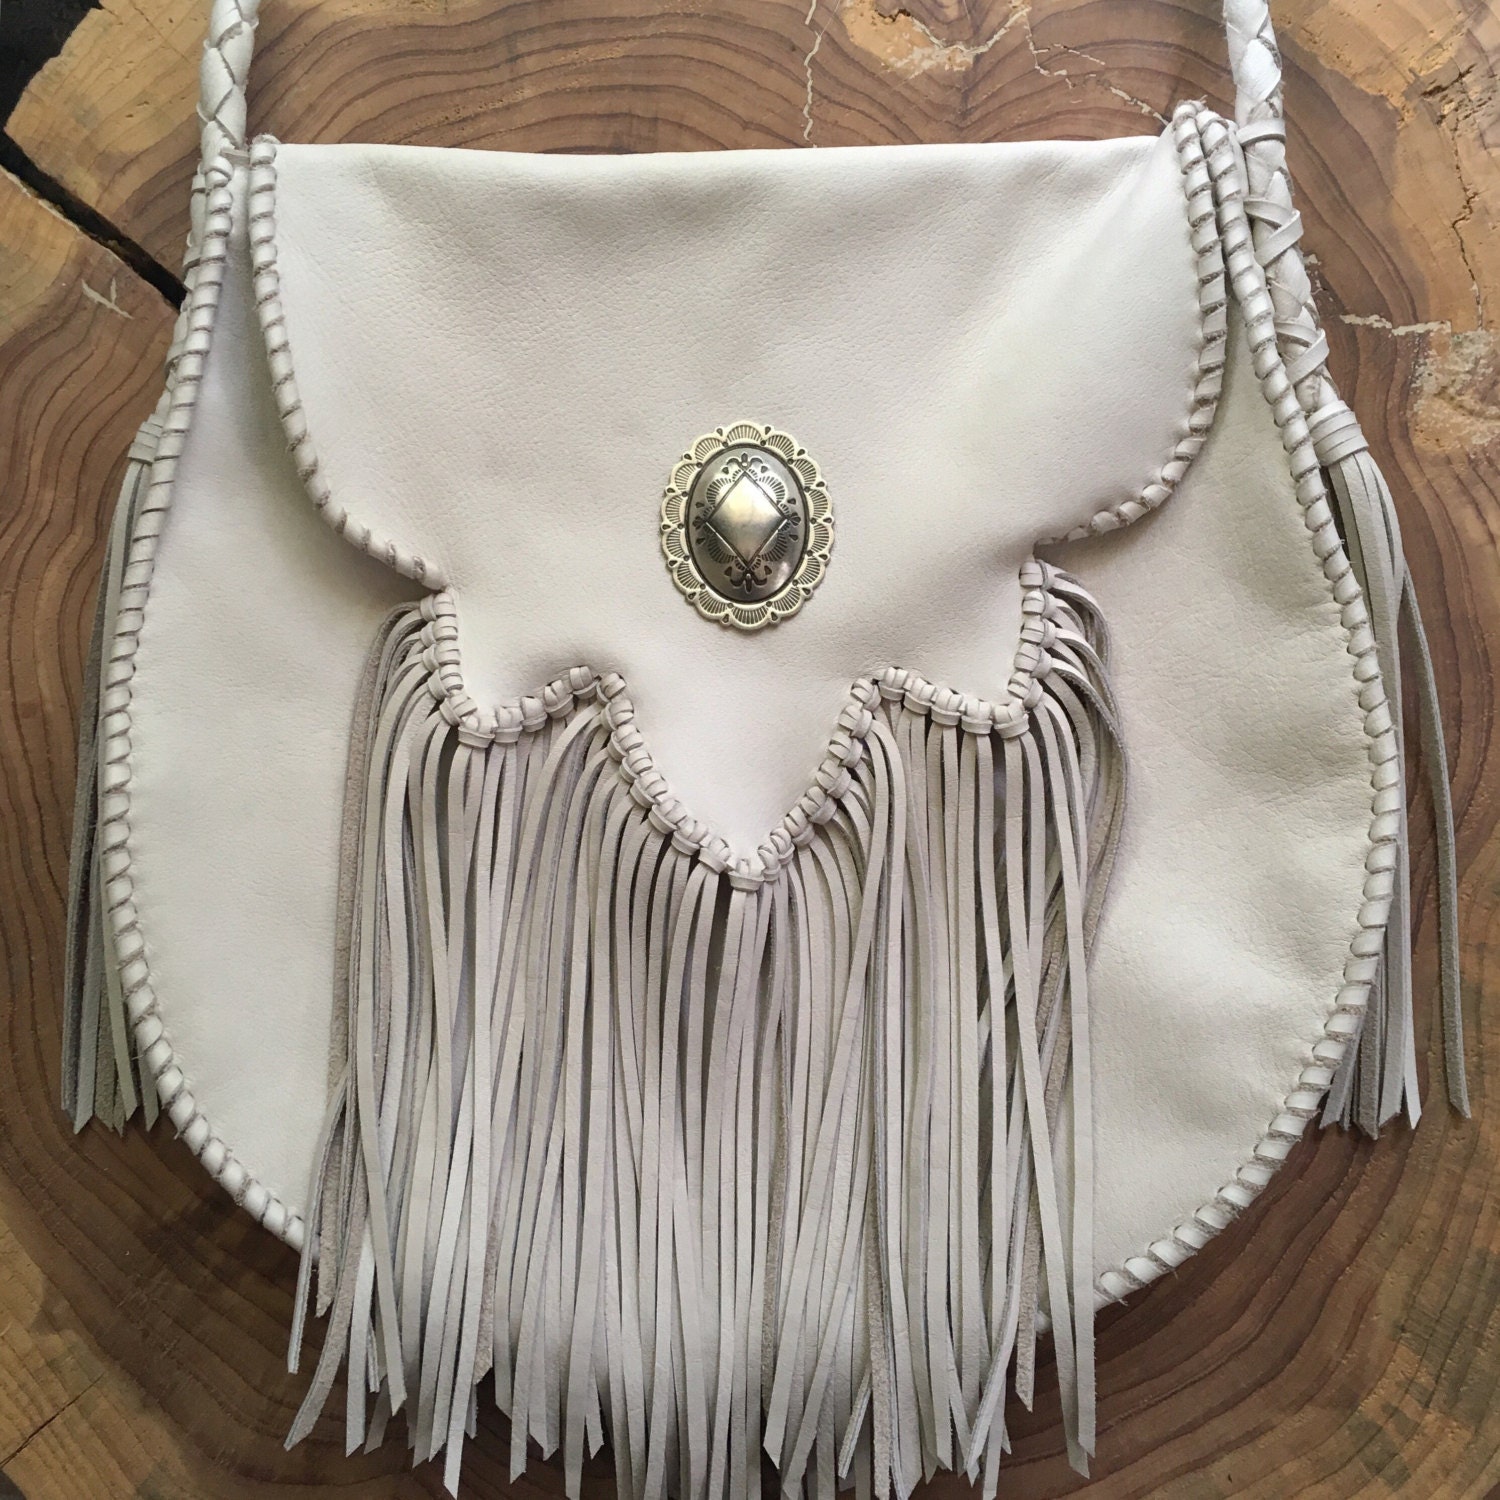 Shop Luxury Leather Fringe Handbags For Women Online | M.I.L.A – M.I.L.A.  made in Los Angeles